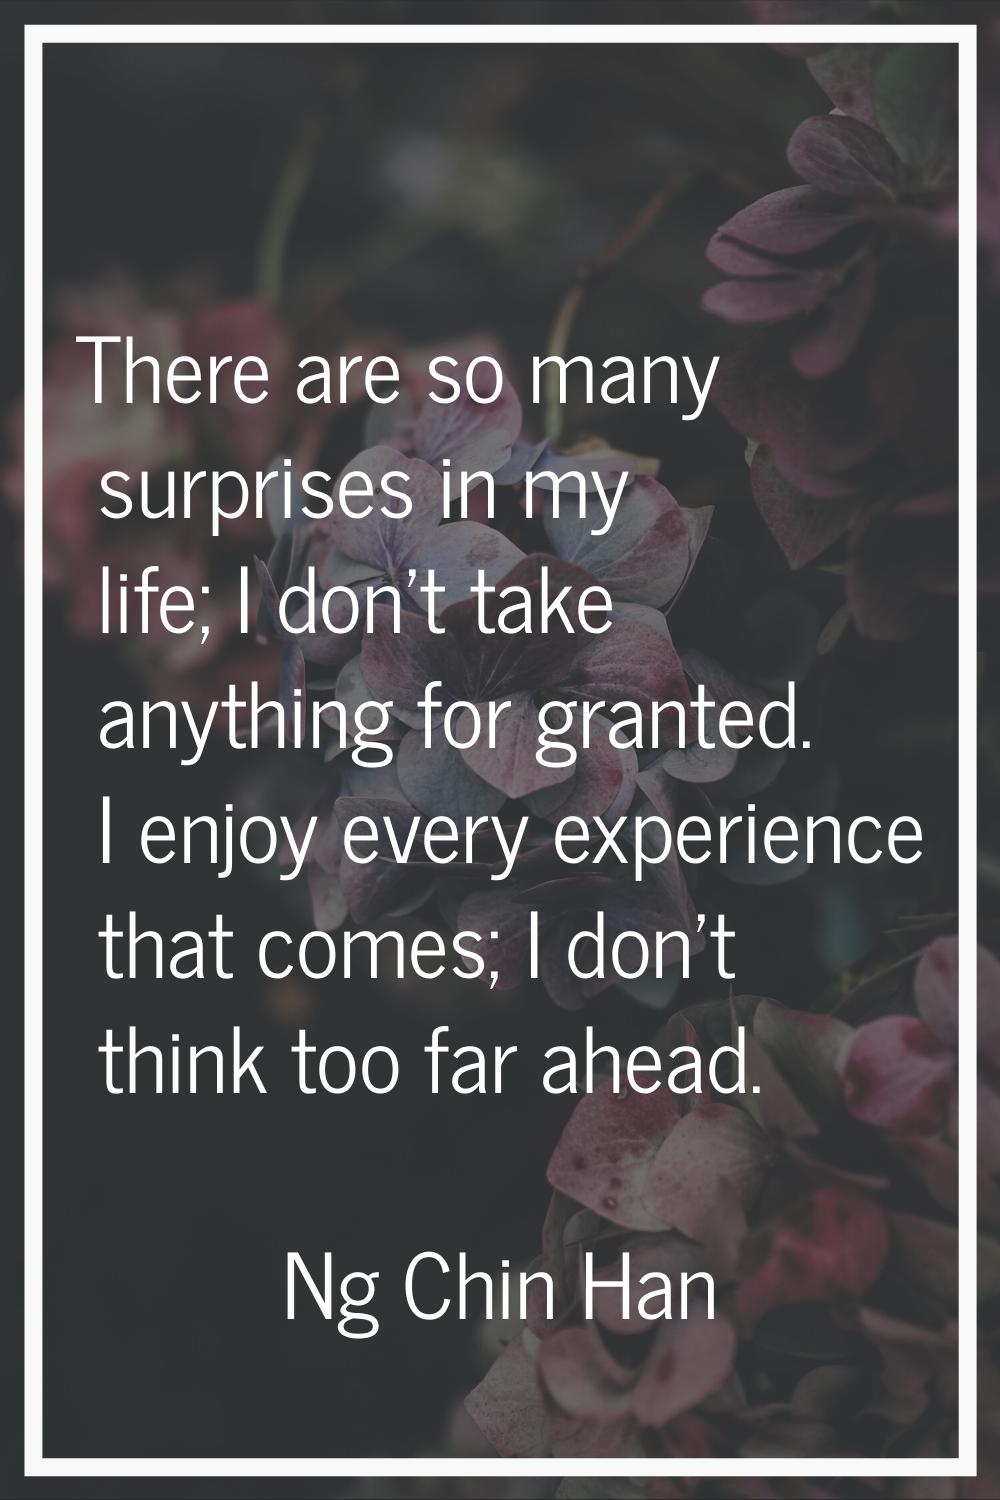 There are so many surprises in my life; I don't take anything for granted. I enjoy every experience